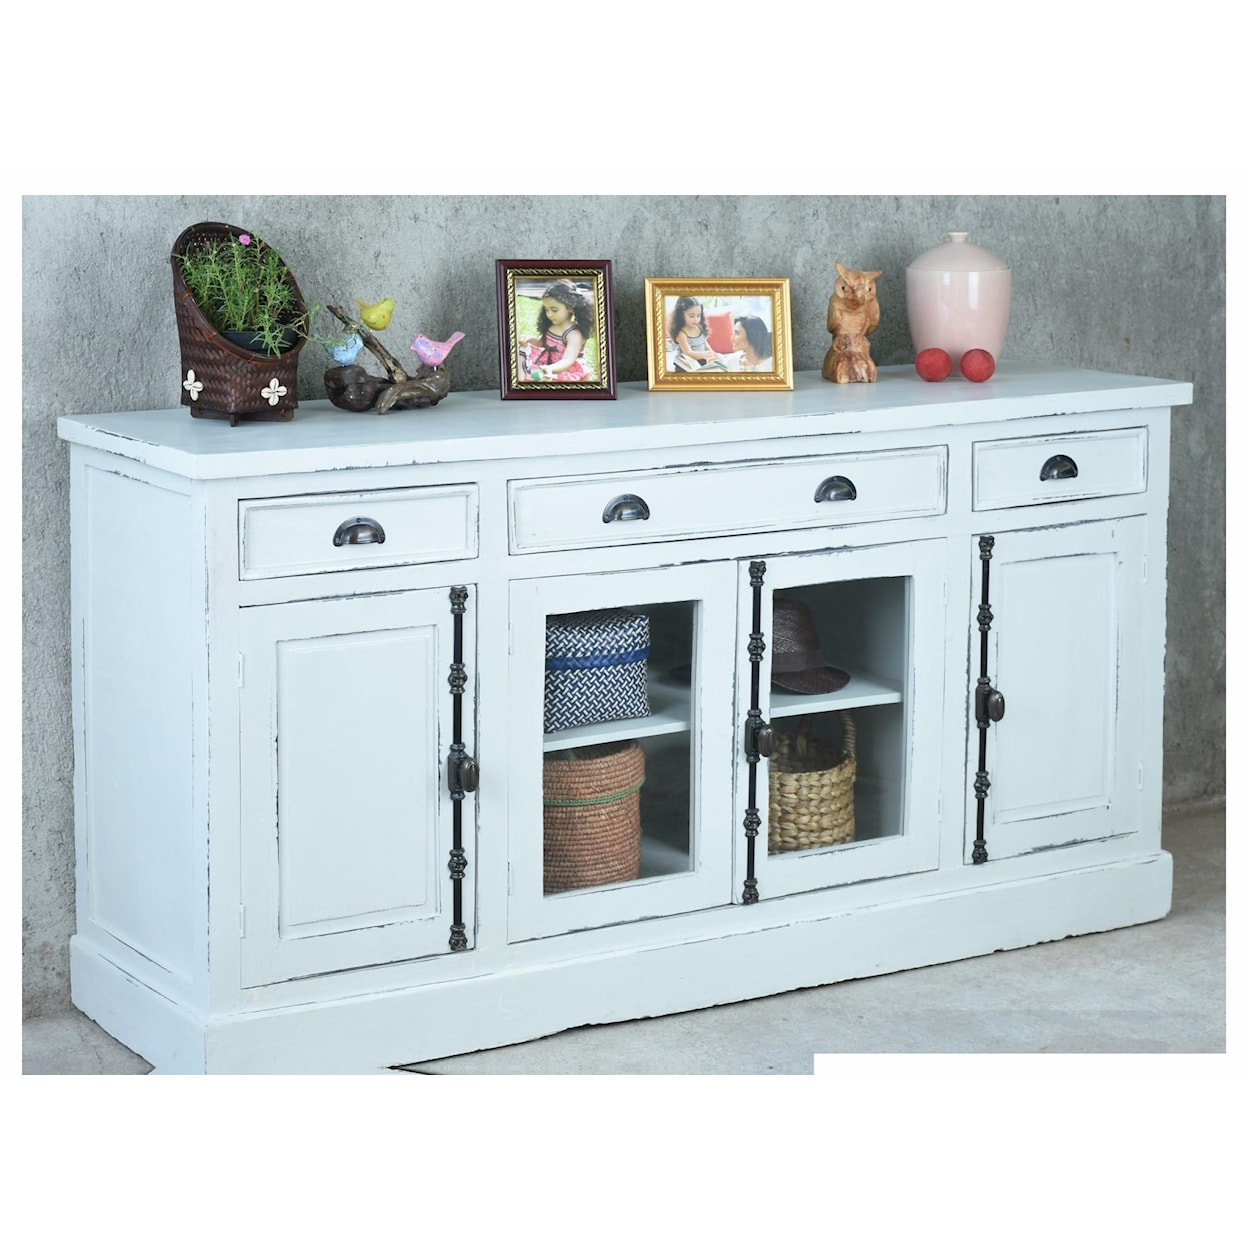 Pacific Paladin Imports Sideboard and Cabinets MEDIA CREDENZA PEAR